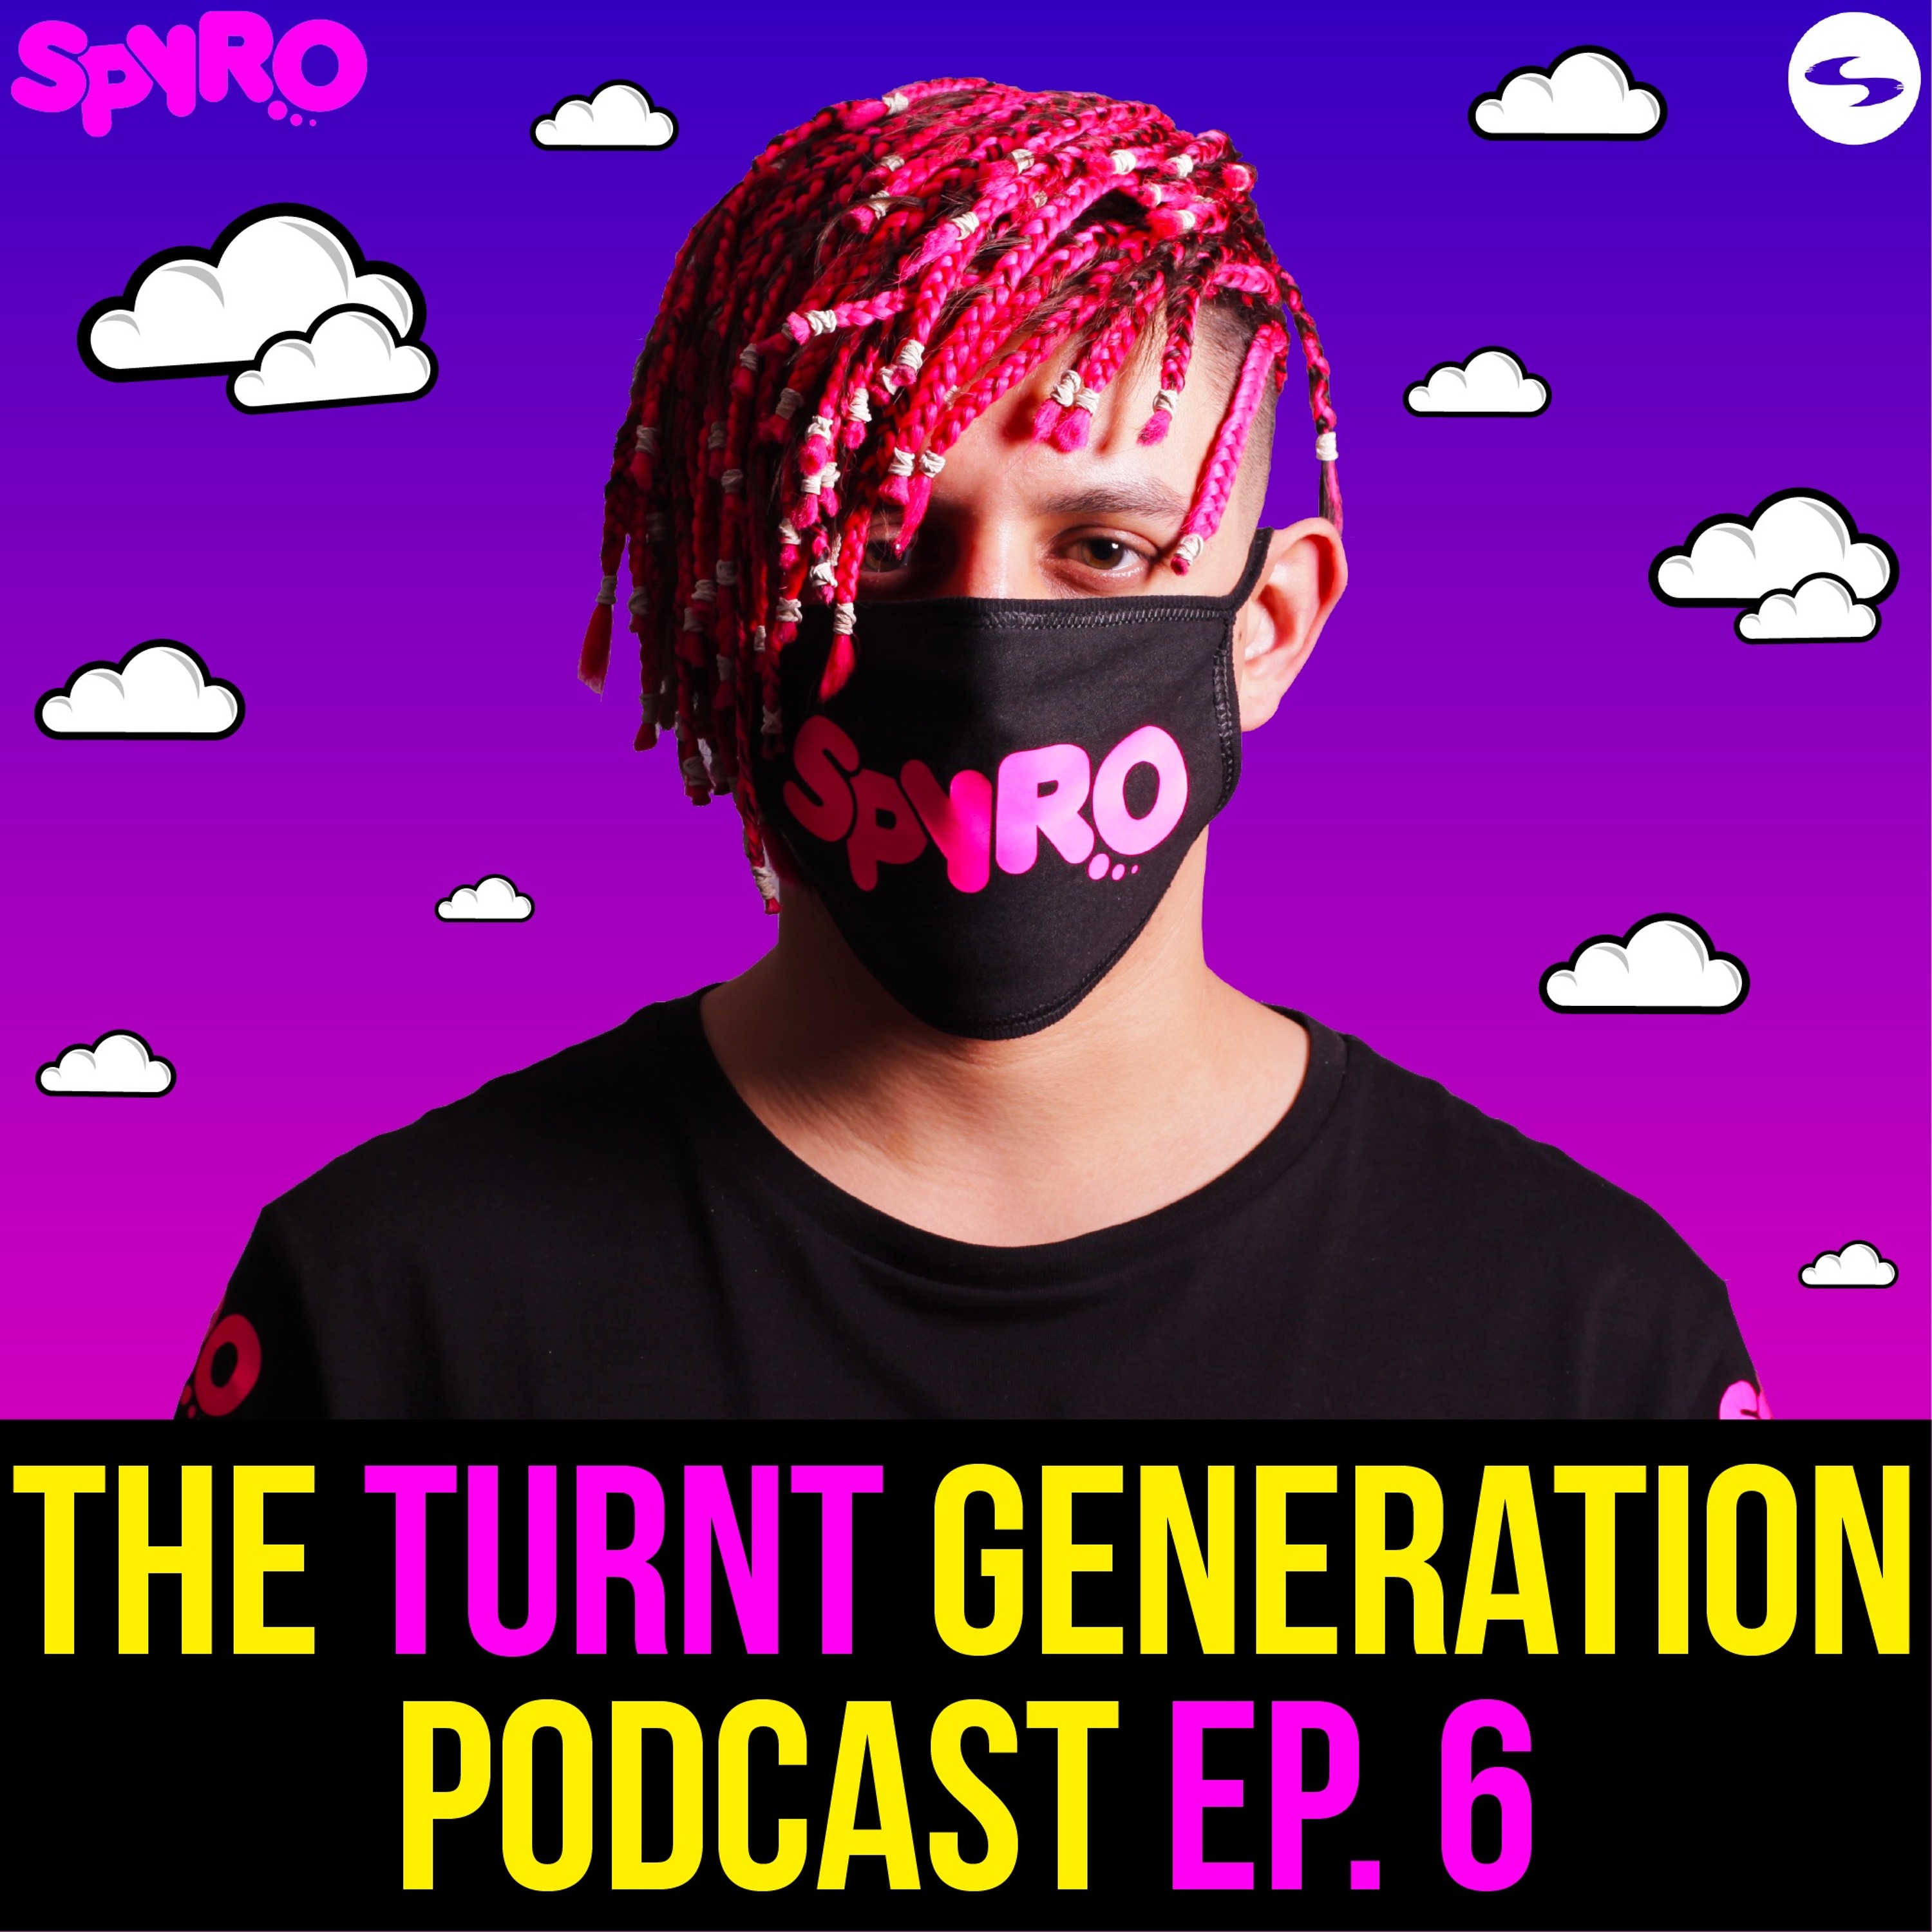 Best The Turnt Generation Podcast Podcasts | Most Downloaded Episodes